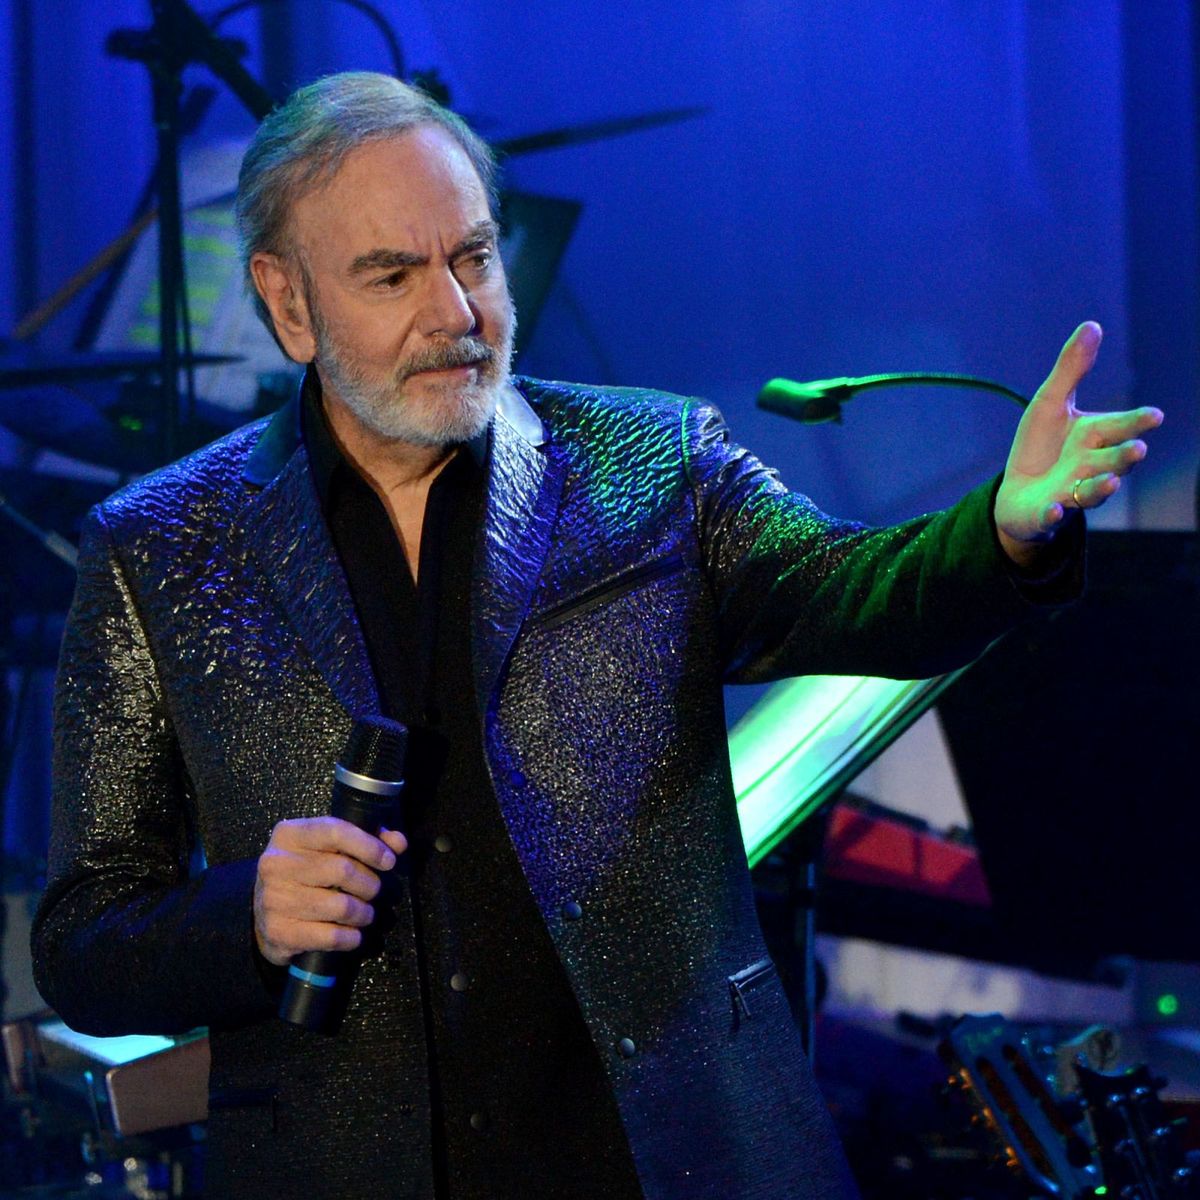 See 81-Year-Old Neil Diamond Now in a Rare Post-Retirement Appearance